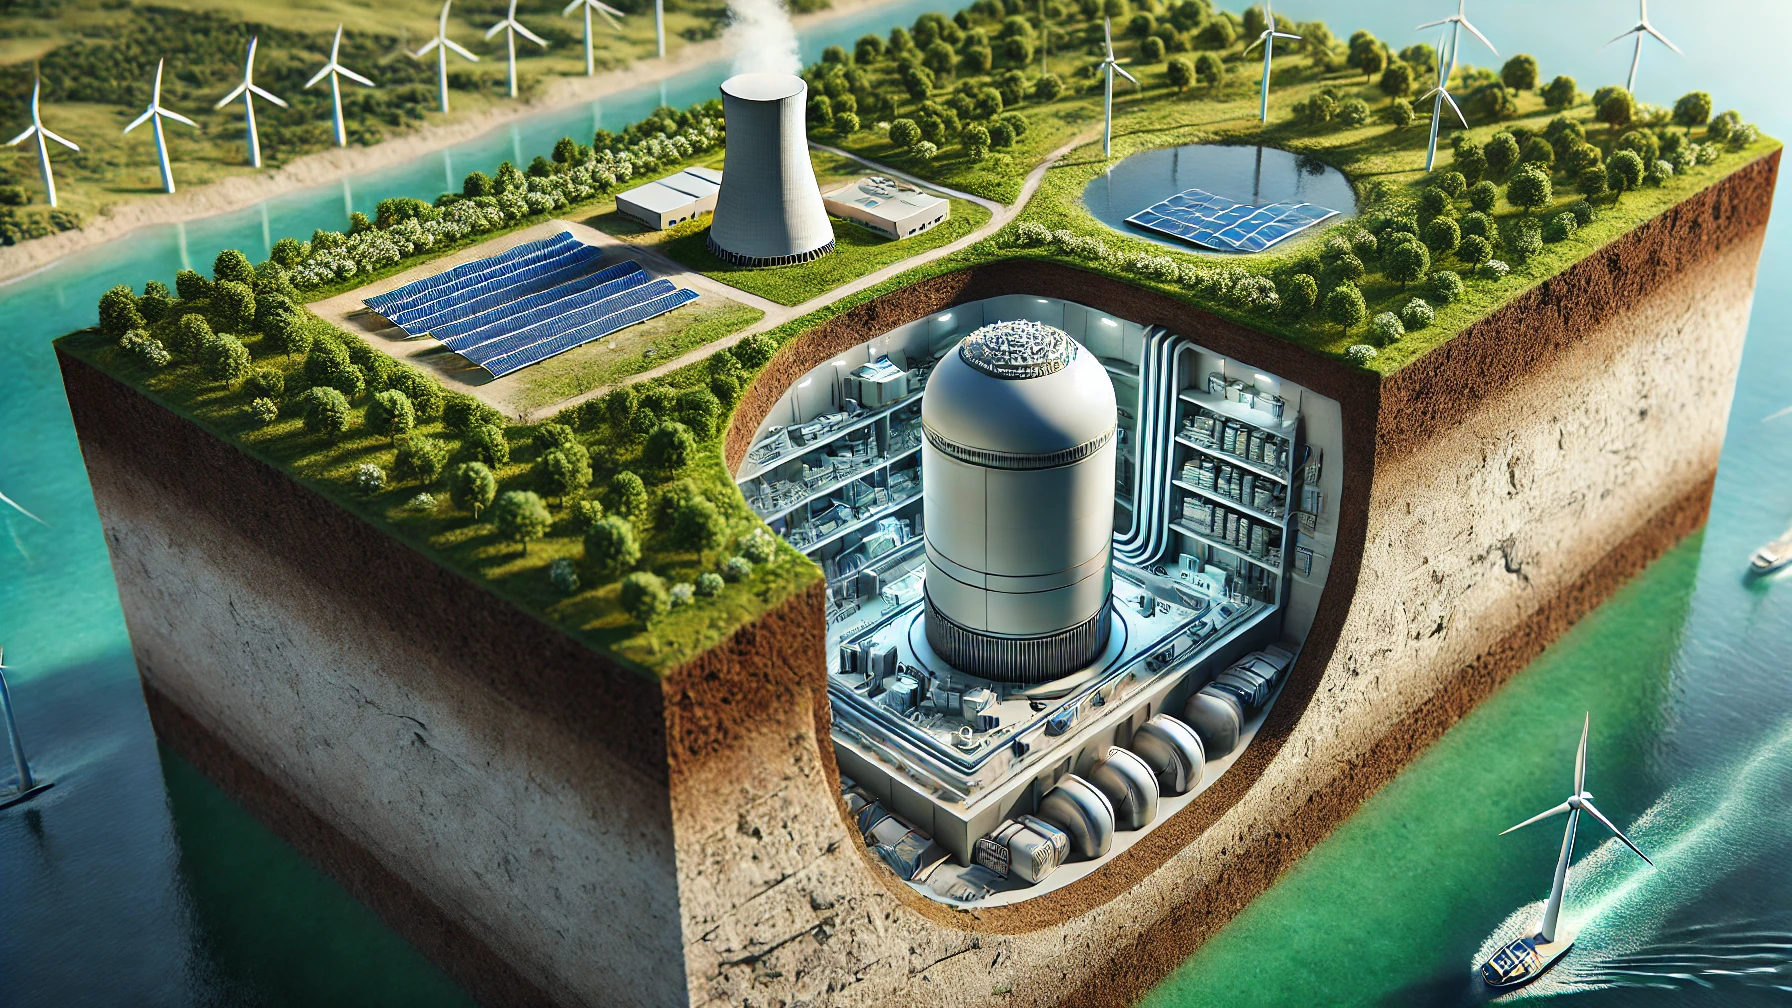 Illustration of an underground small modular reactor with a cutaway view, surrounded by green landscape, wind turbines, solar panels, and a clean river, symbolizing sustainable energy integration.